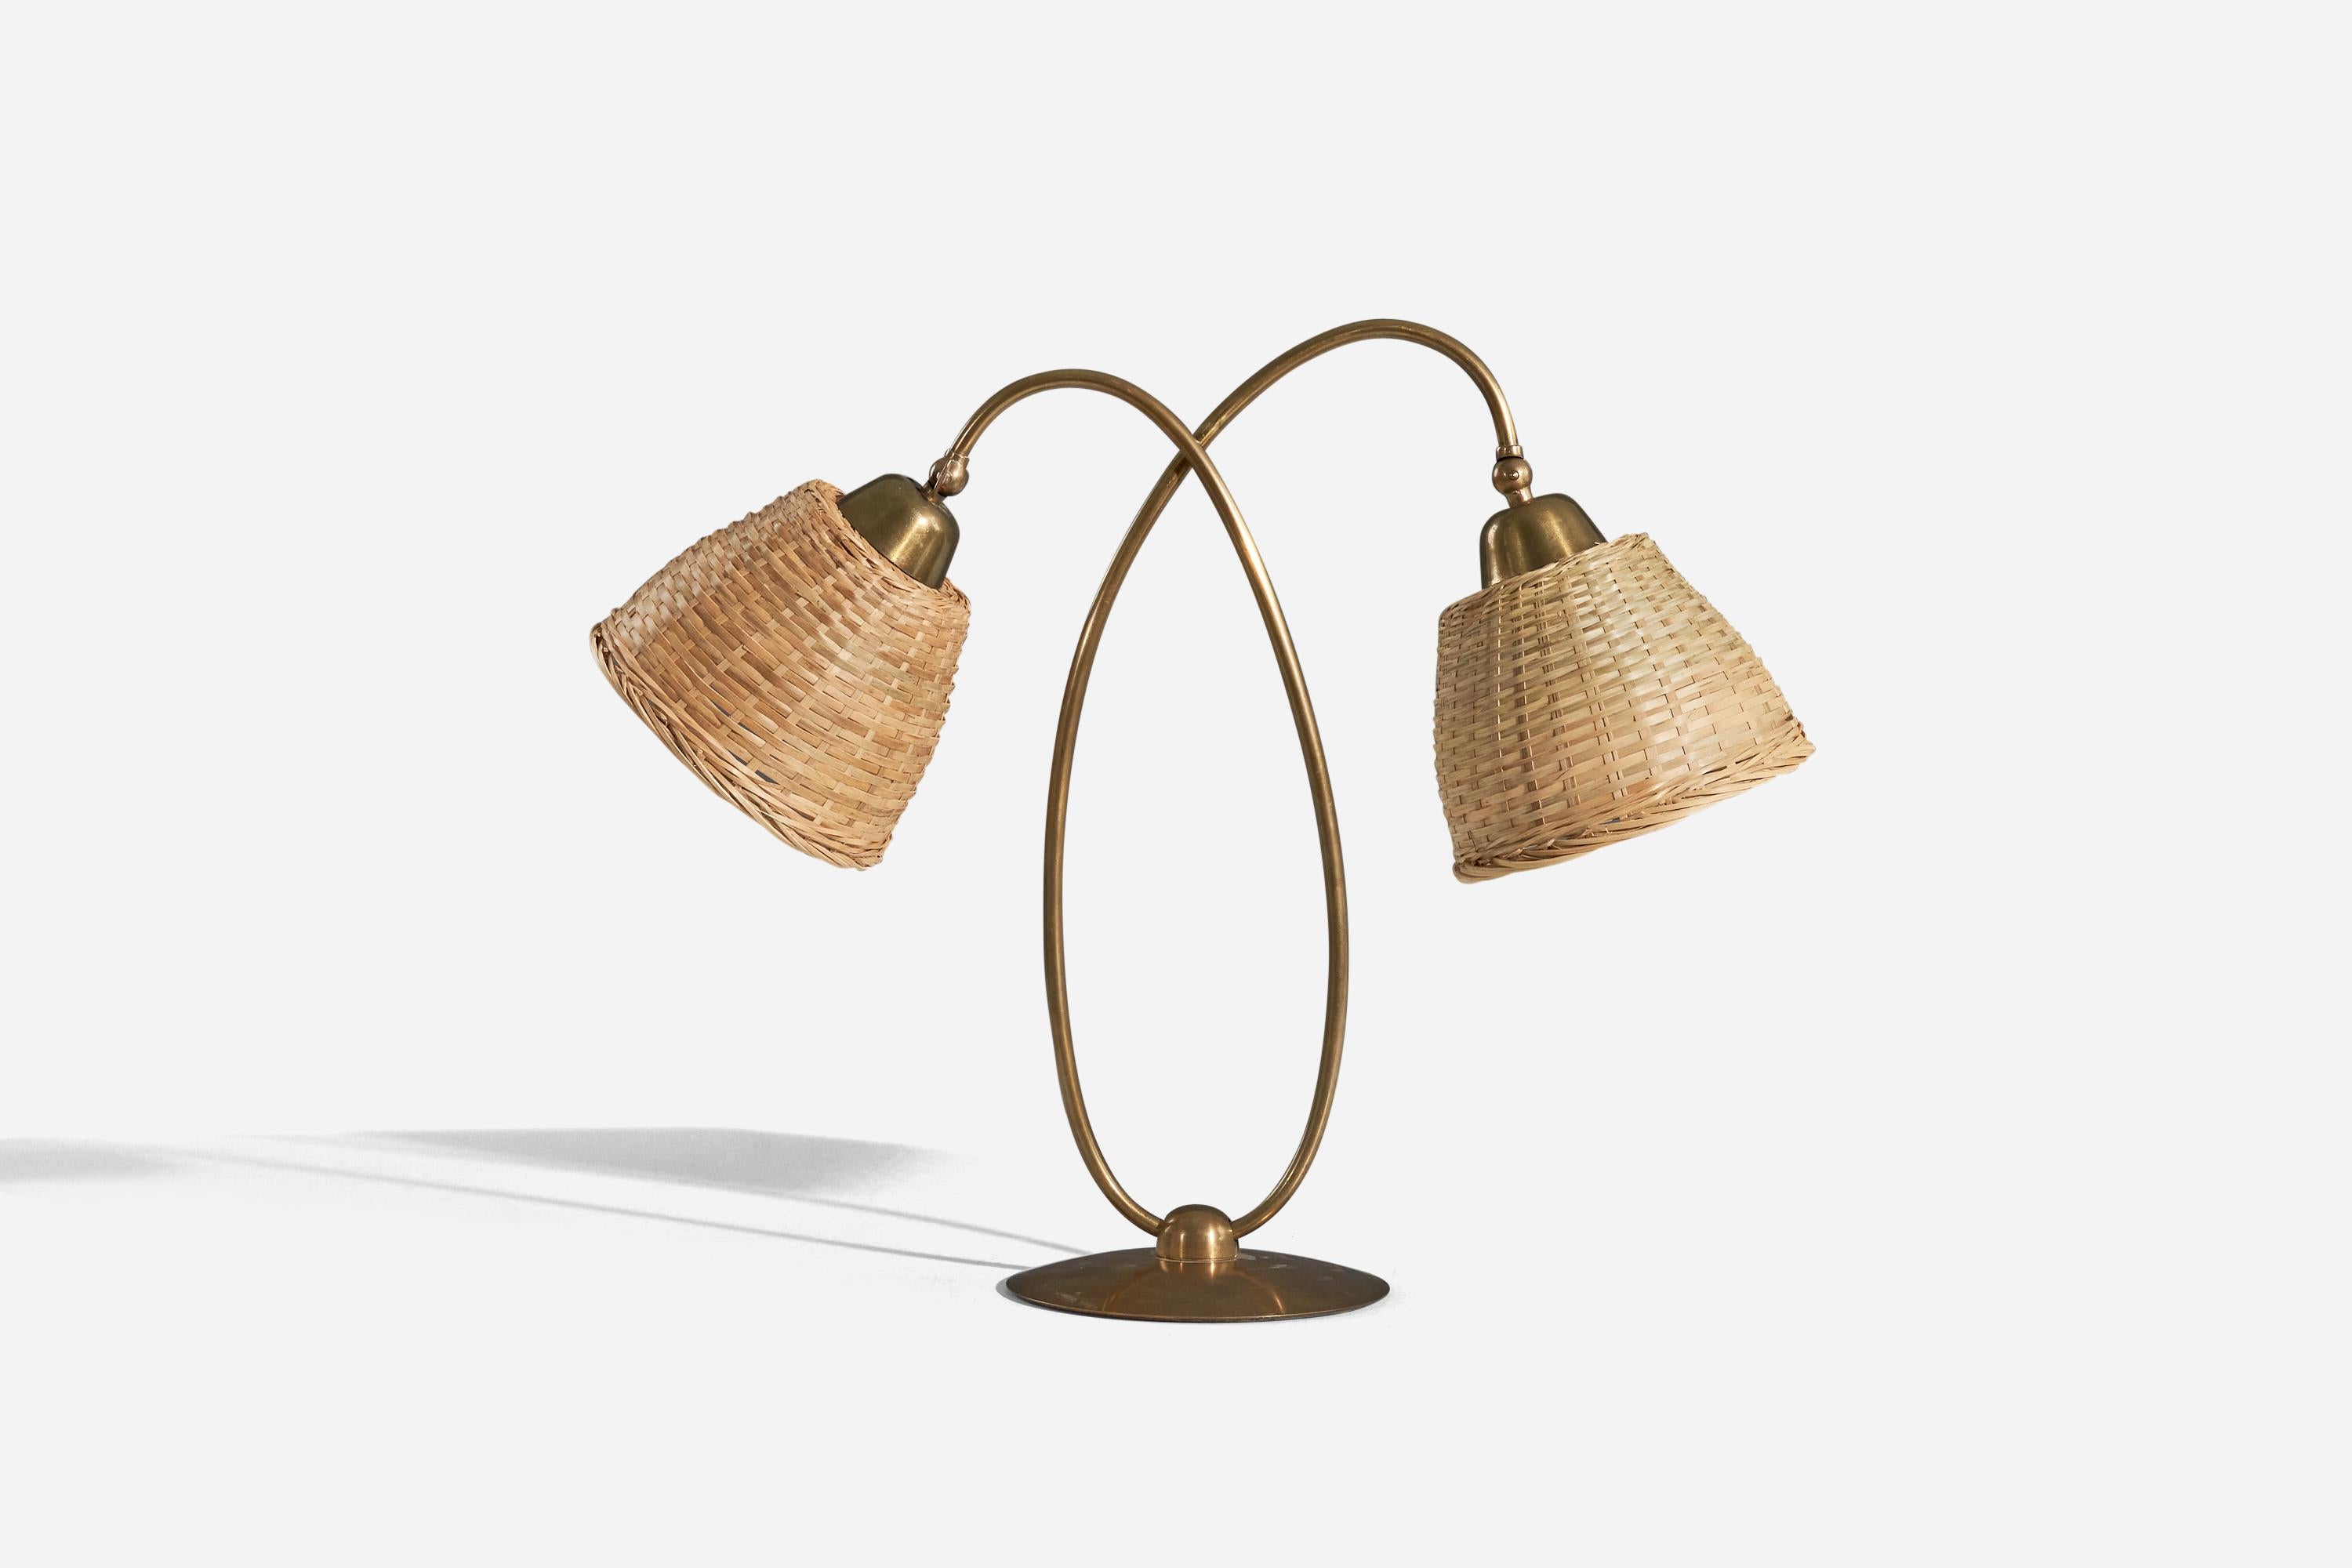 A brass and rattan table lamp designed and produced by Svend Aage Holm Sørensen, Denmark, 1950s.

Sold with lampshades.
Stated dimensions refer to the Lamp with the Shades.